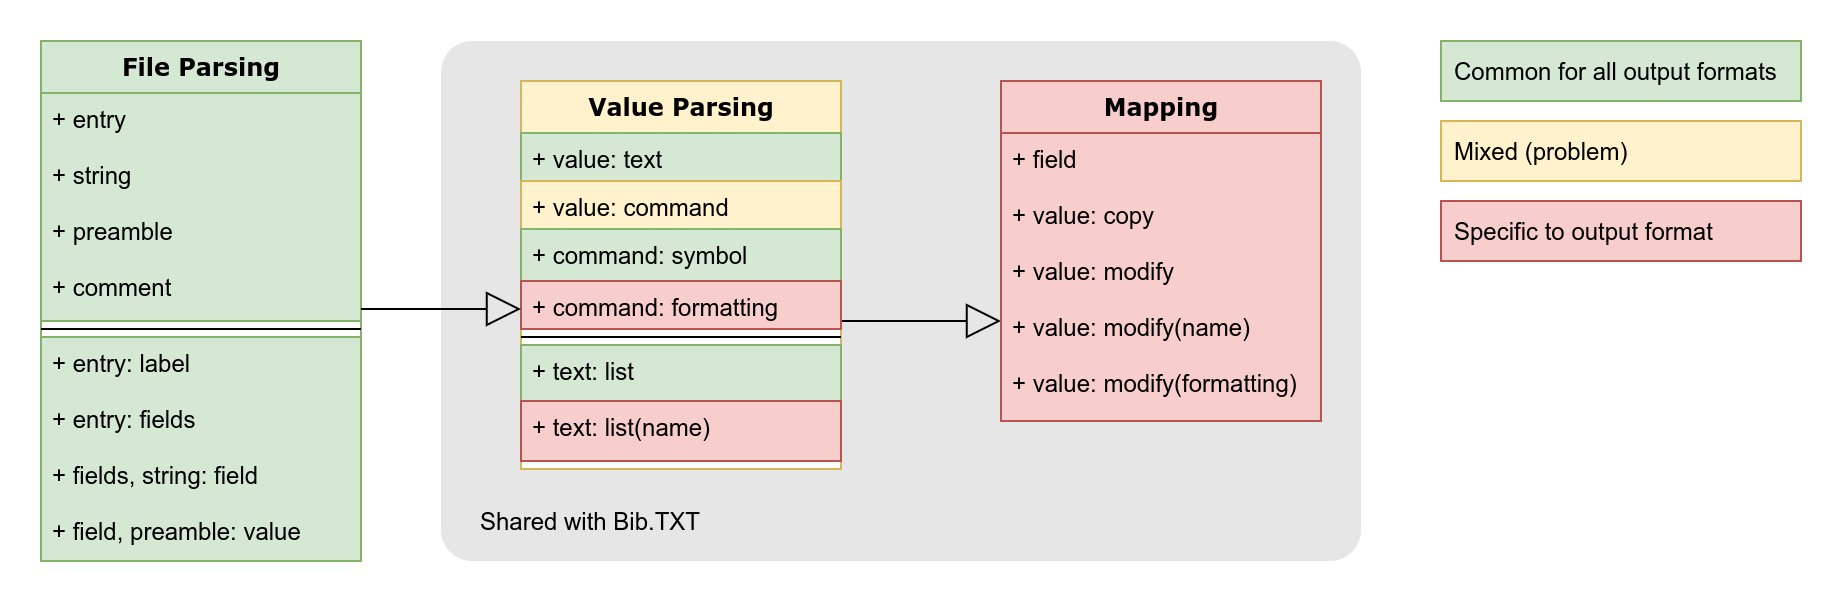 Parsing stages of BibTeX